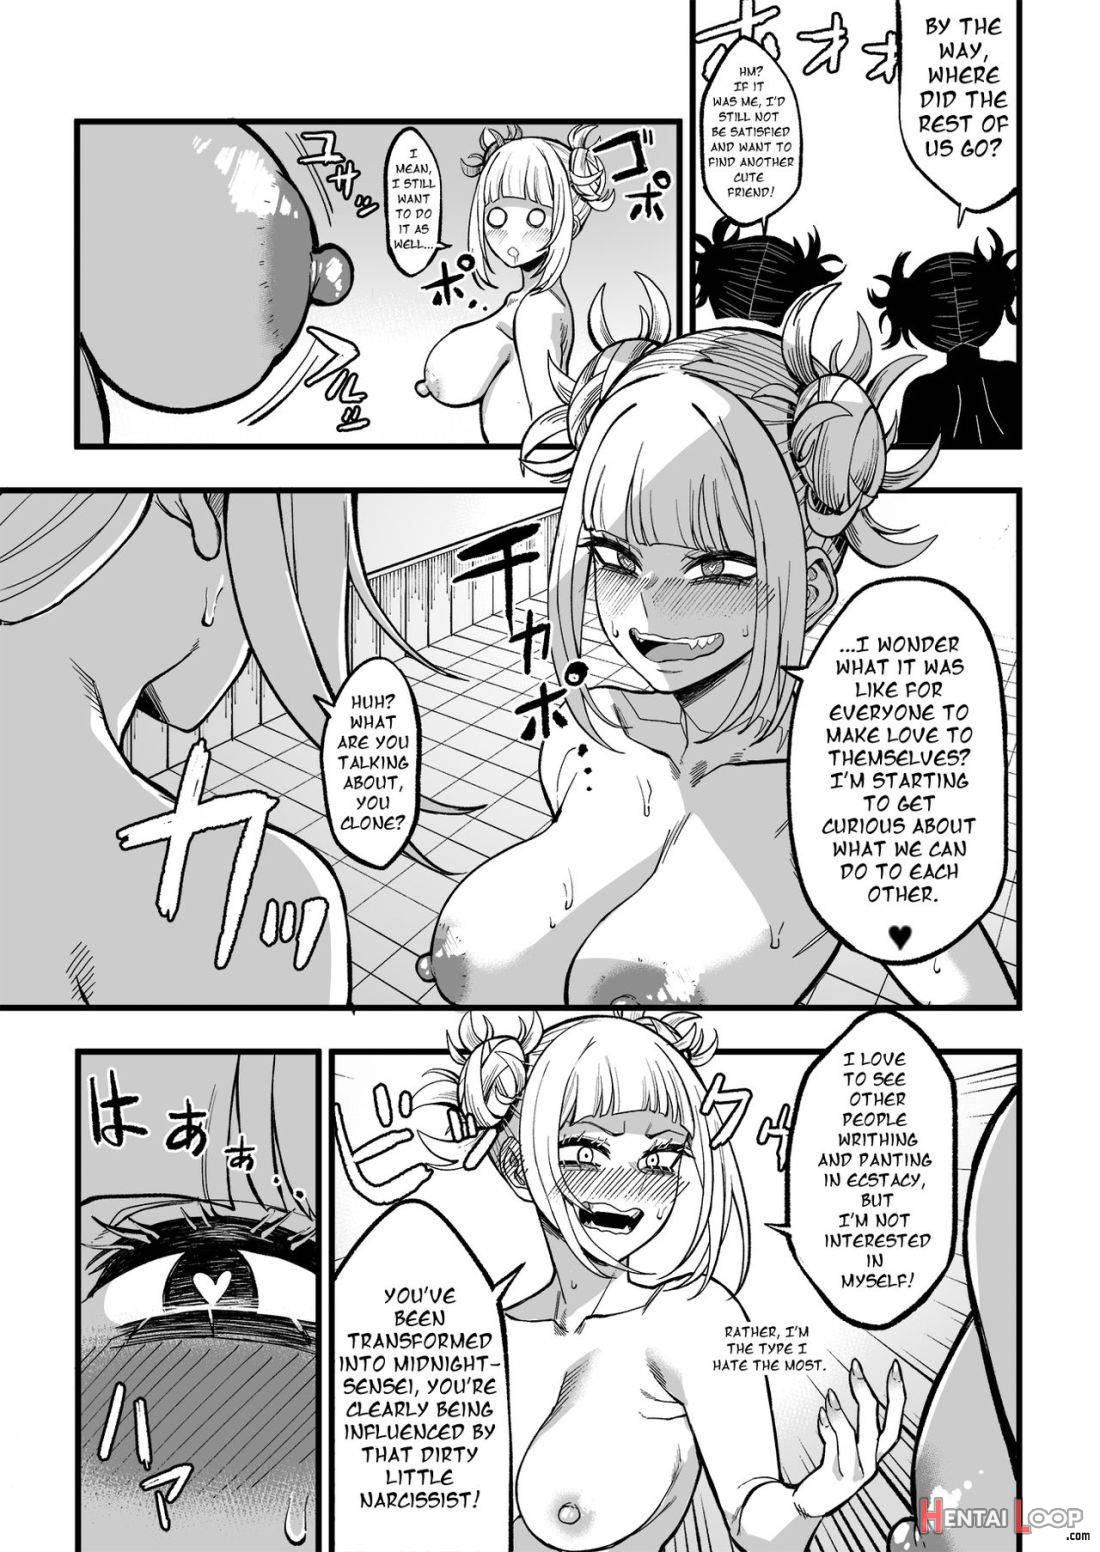 Selfcest in the Academy page 23